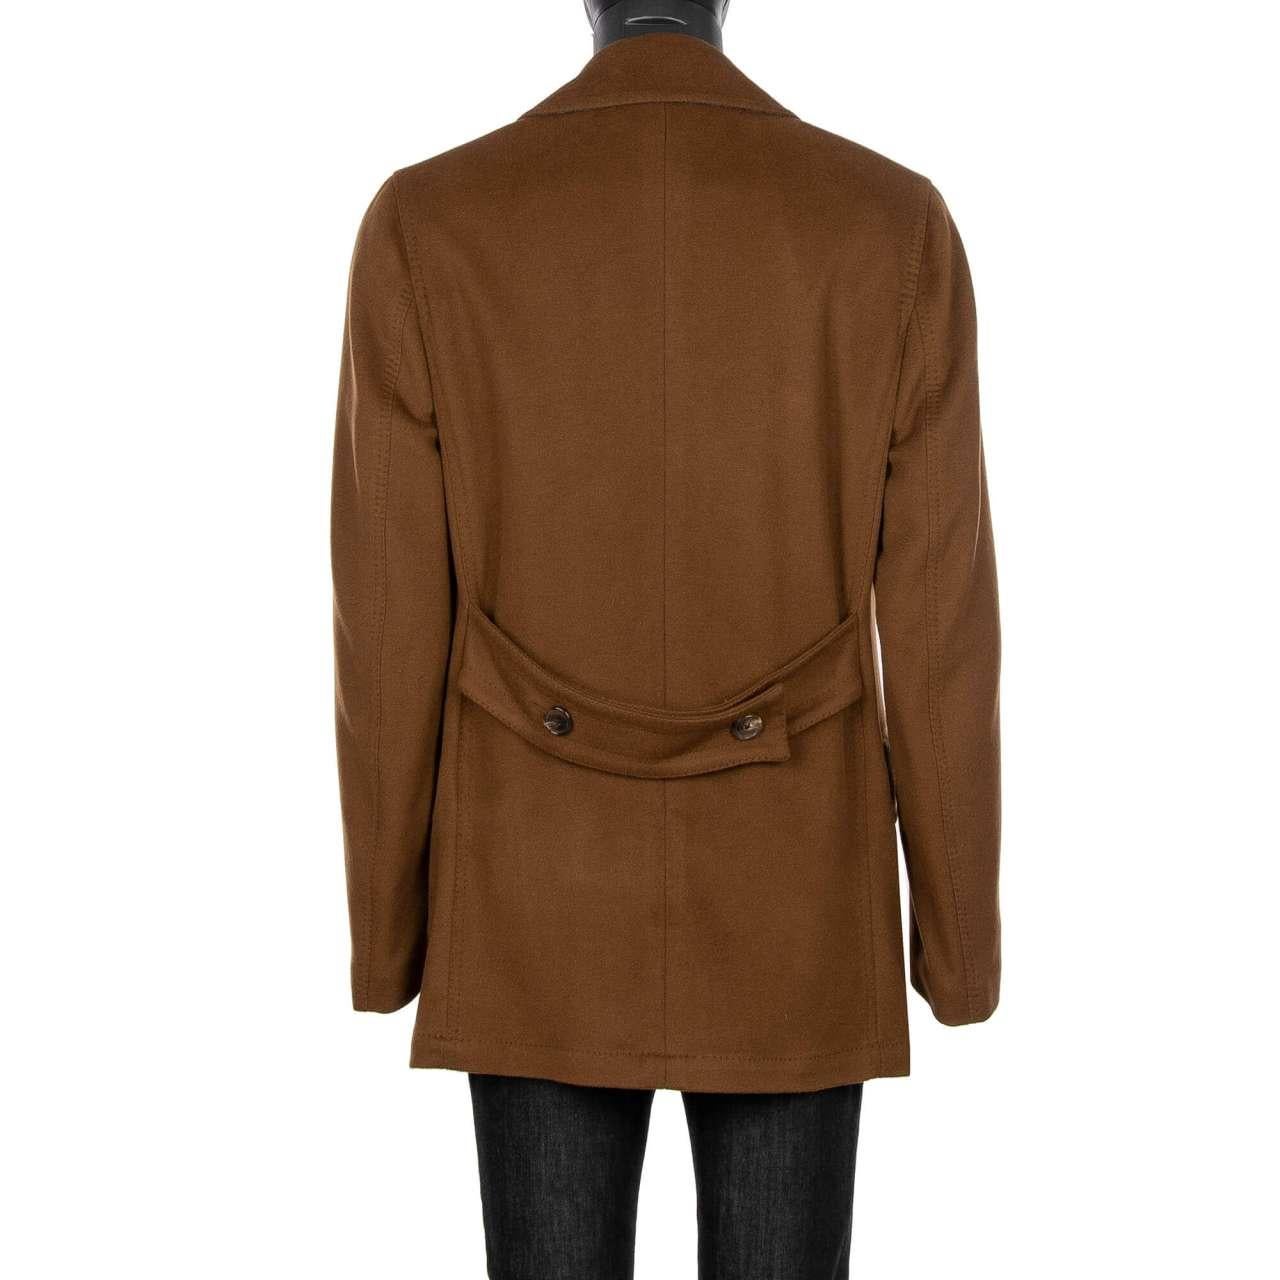 Dolce & Gabbana - Double-Breasted Cashmere Coat Camel Brown 58 For Sale 1